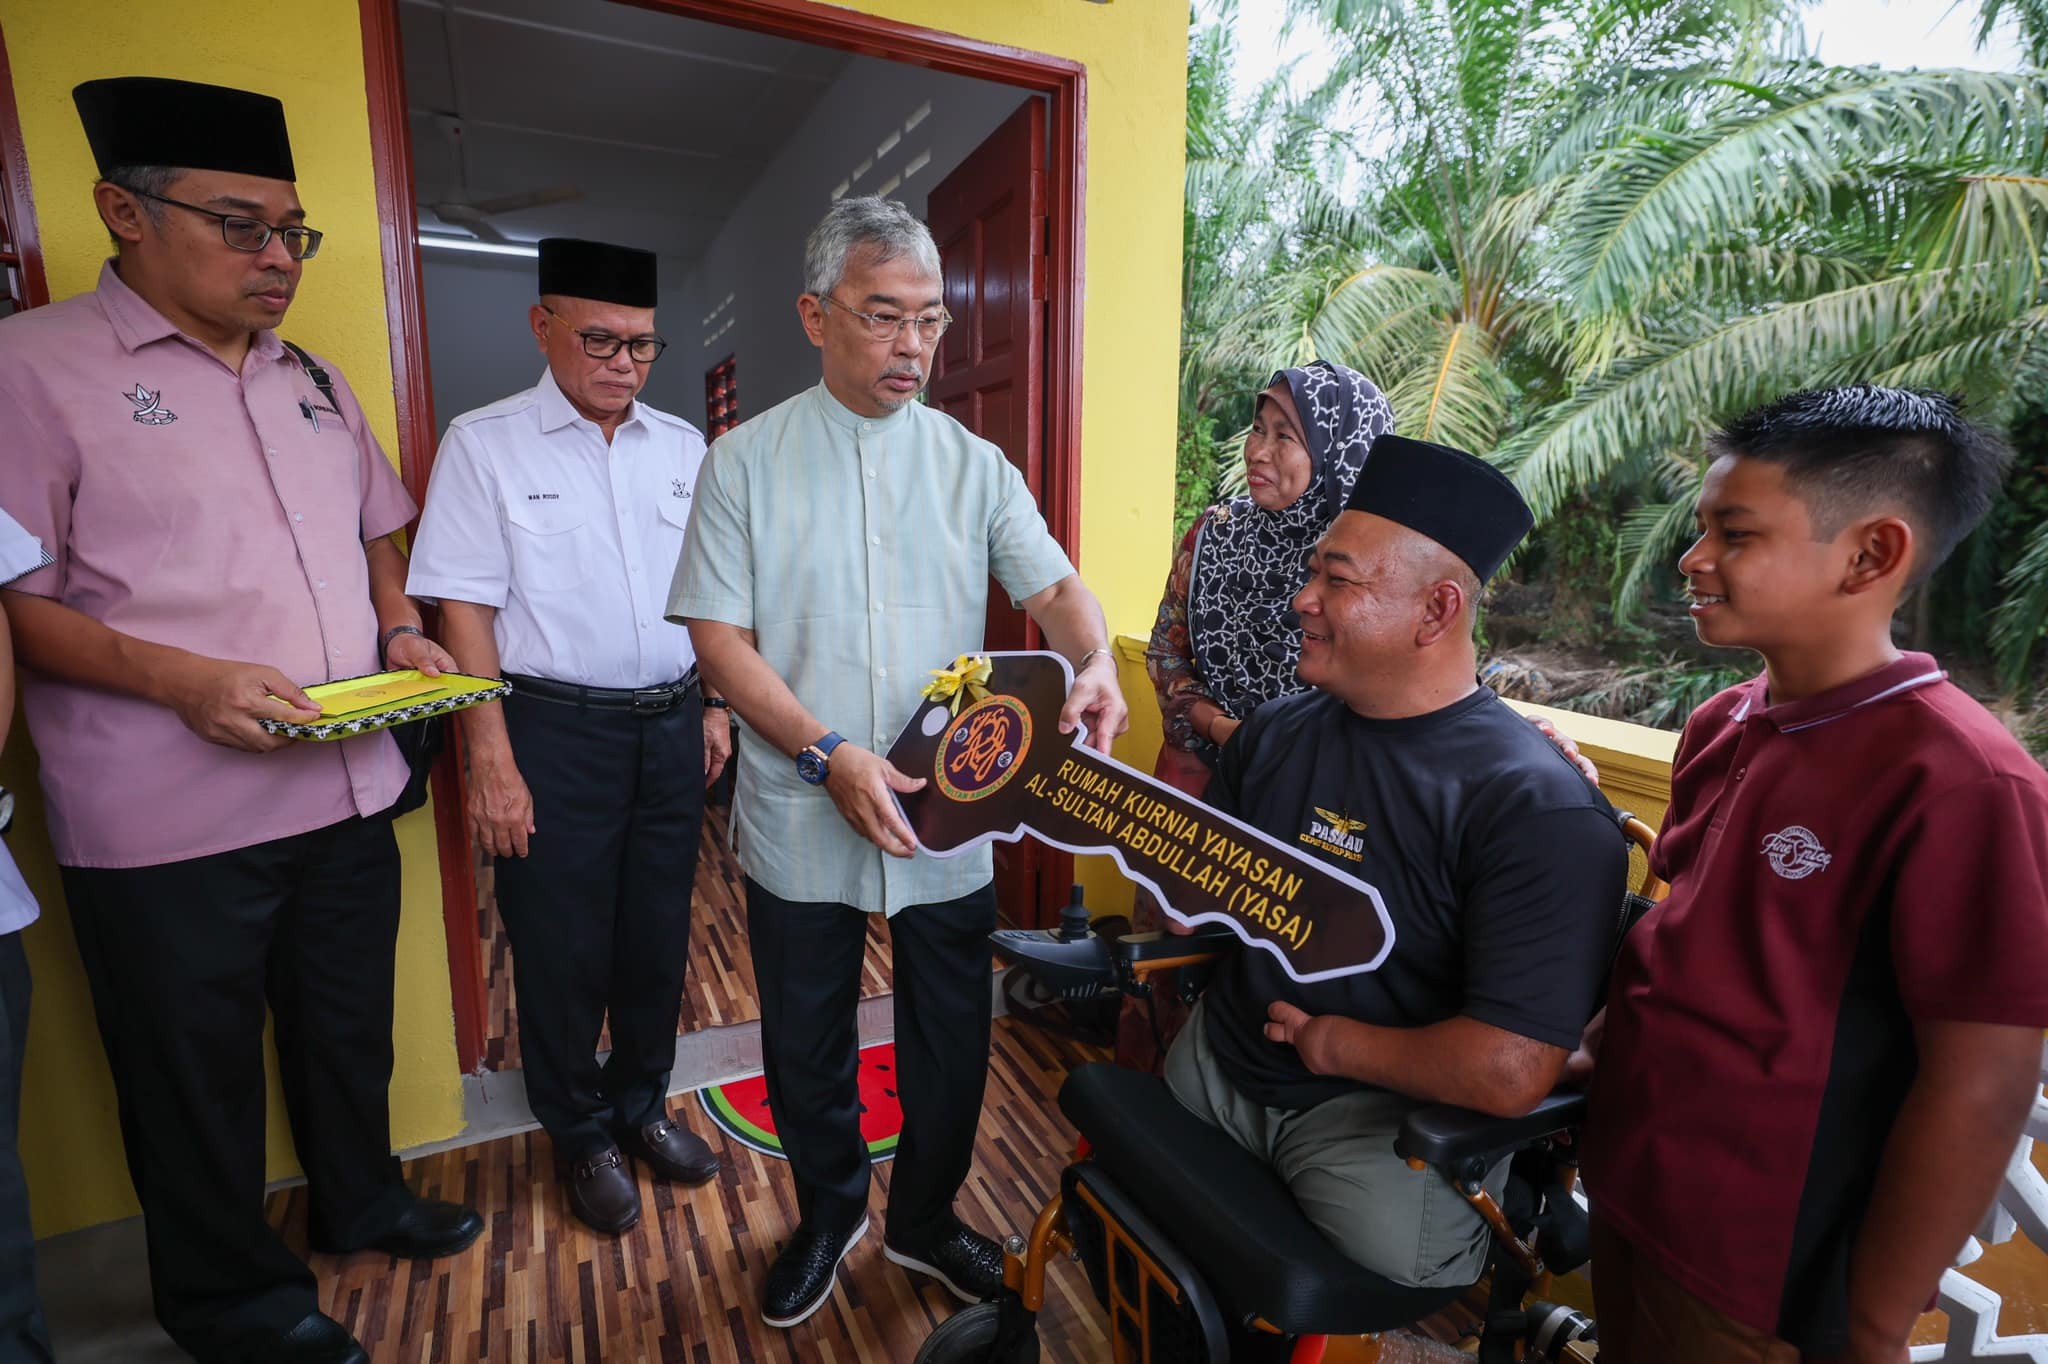 Agong gives house to oku man in pahang as a gift, receives praise online